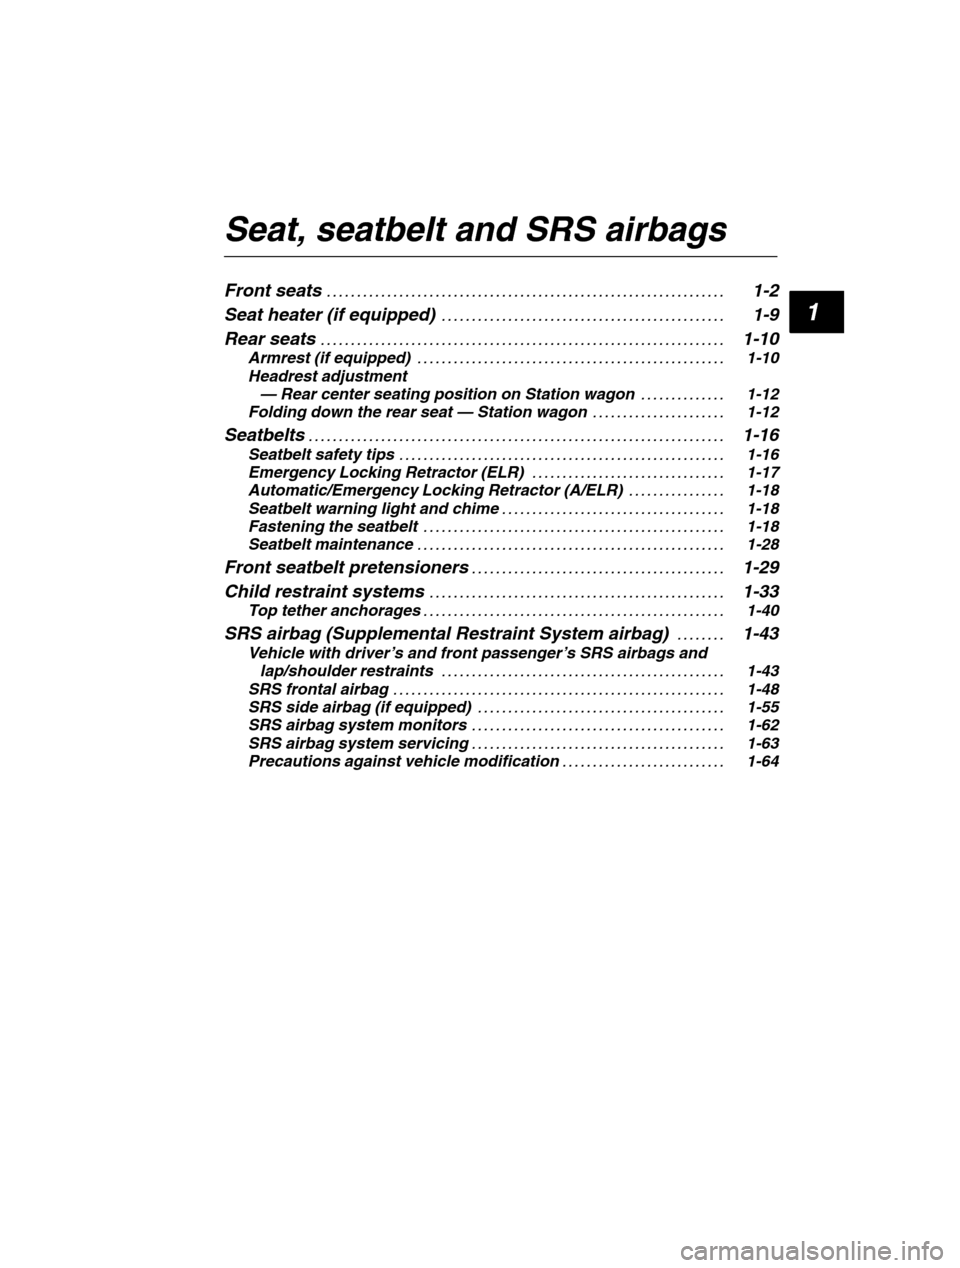 SUBARU FORESTER 2002 SG / 2.G Owners Manual 1
Seat, seatbelt and SRS airbags Front seats1-2
. . . . . . . . . . . . . . . . . . . . . . . . . . . . . . . . . . . . . . . . . . . . . . . . . . . . . . . . . . . . . . . .  . . 
Seat heater (if eq